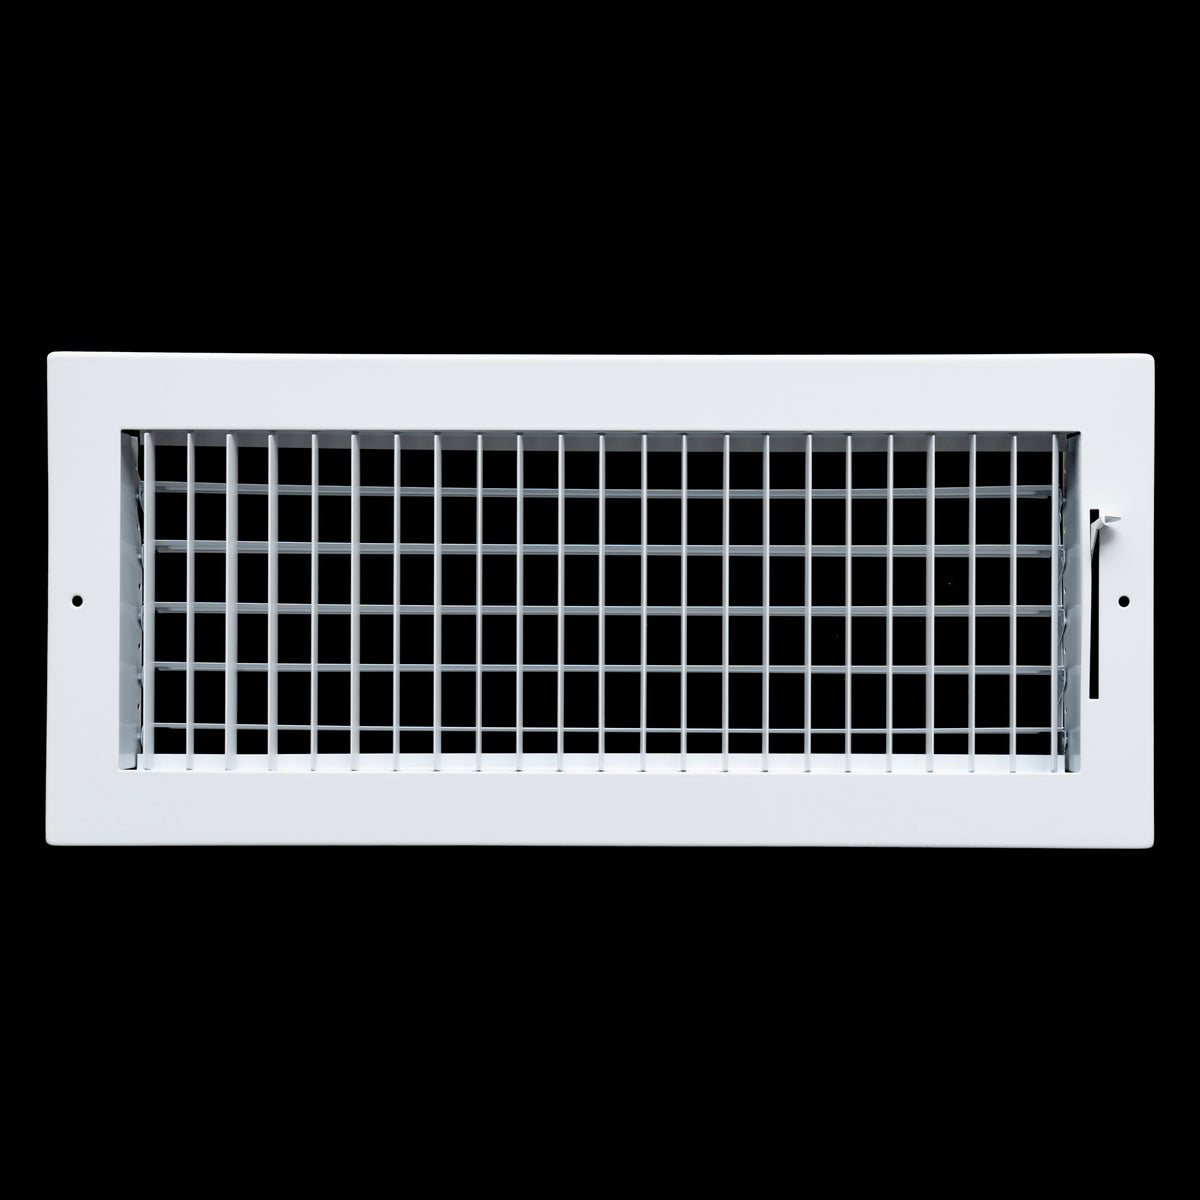 airgrilles 16"w x 6"h steel adjustable air supply grille   register vent cover grill for sidewall and ceiling   white   outer dimensions: 17.75"w x 7.75"h for 16x6 duct opening hnd-adj-wh-16x6- v1